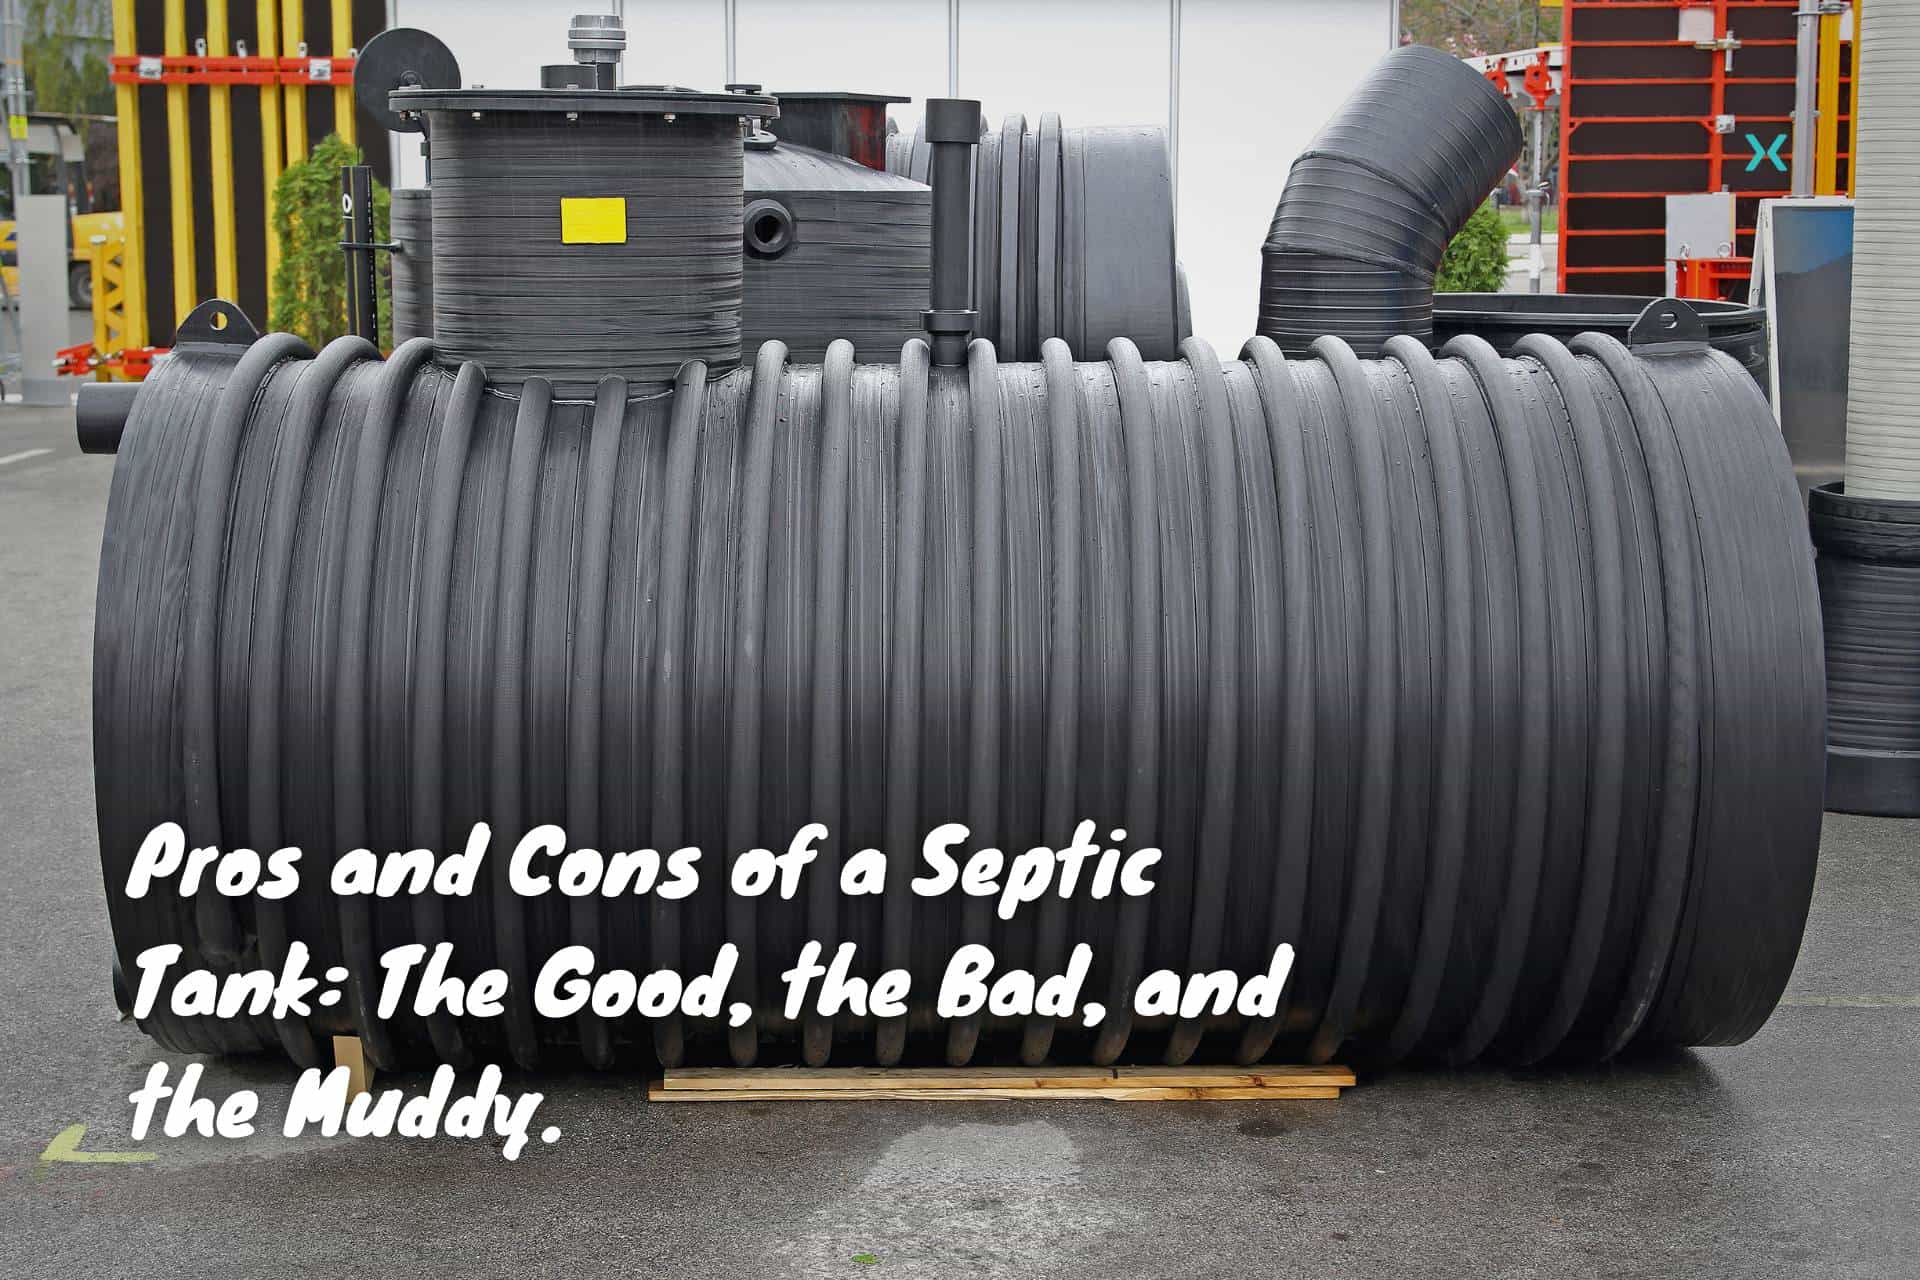 Pros and Cons of a Septic Tank